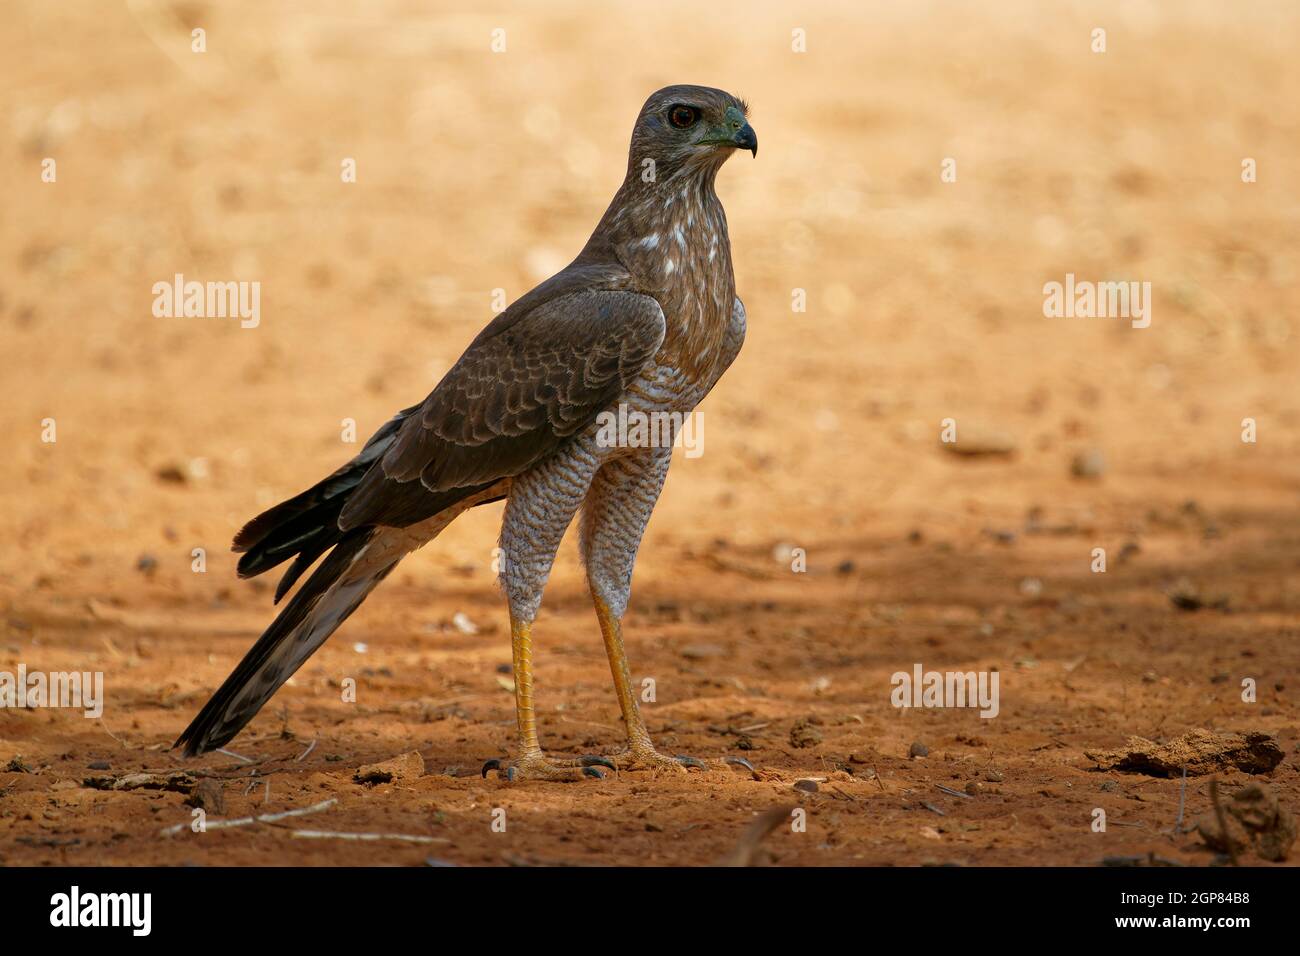 Dark Chanting-goshawk - Melierax metabates grey bird of prey in Accipitridae, found across sub-Saharan Africa and southern Arabia, standing on the des Stock Photo